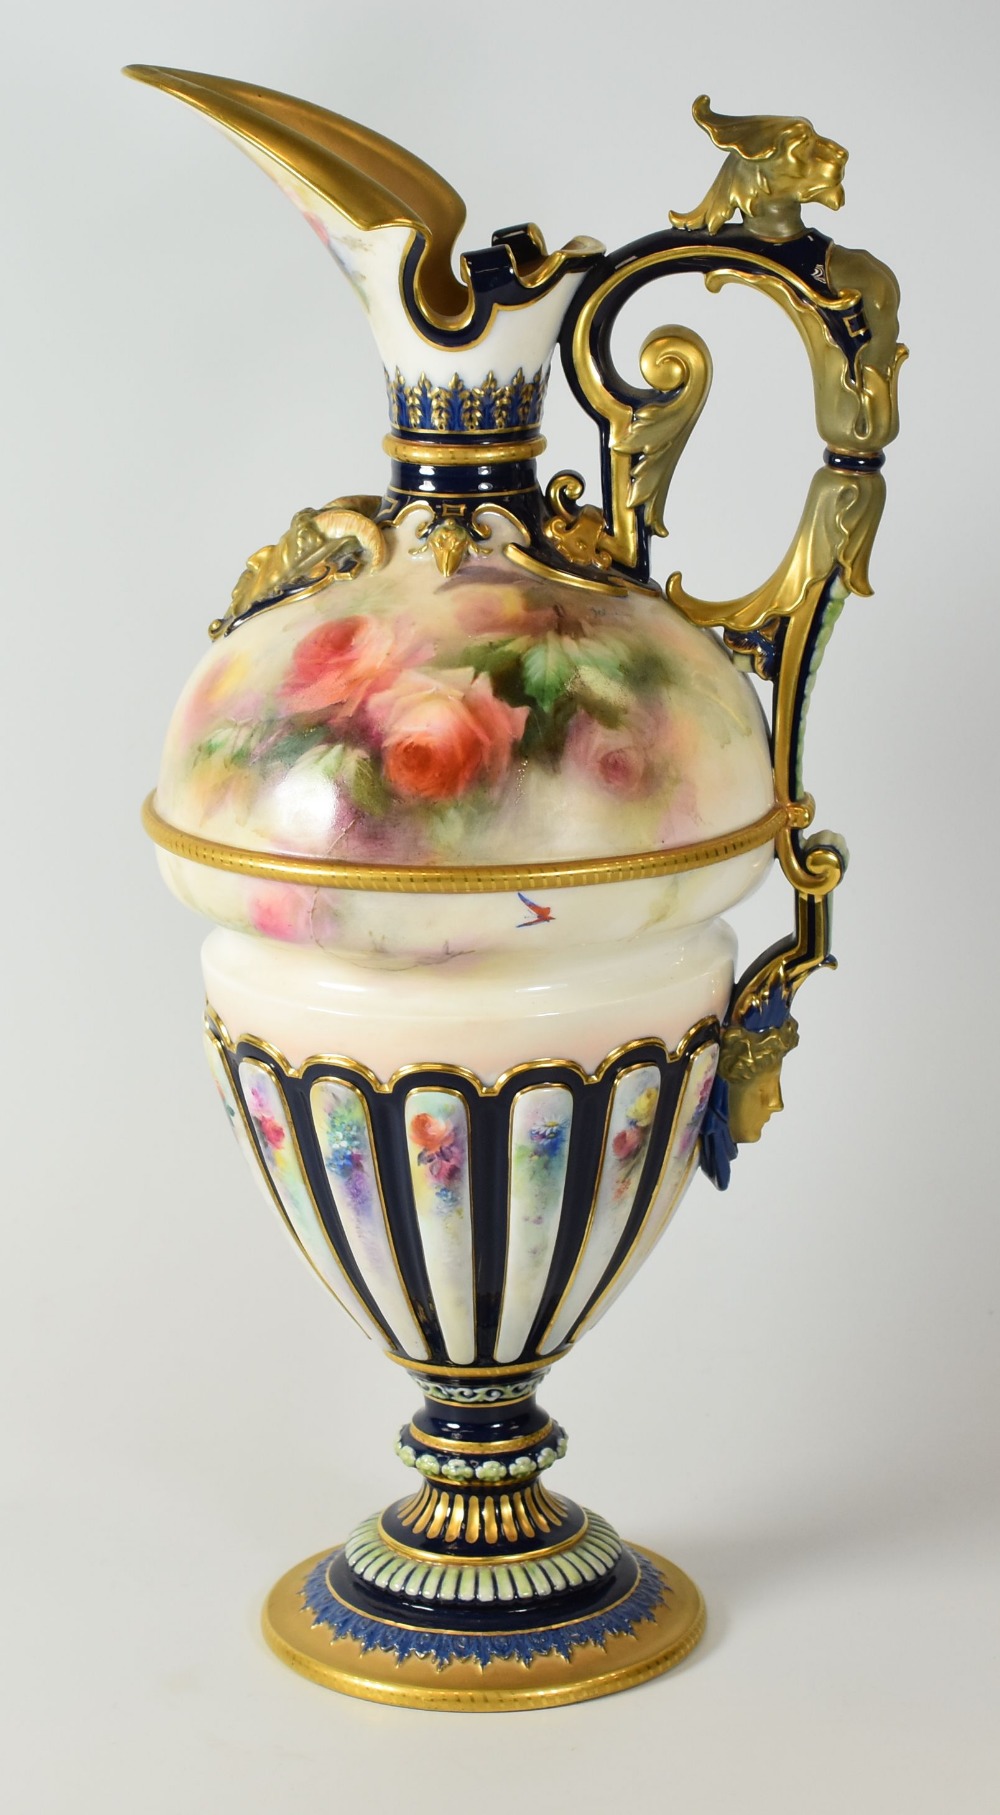 A HADLEY WORCESTER CLARET JUG of elaborate Classical form with spear spout and fluted decoration